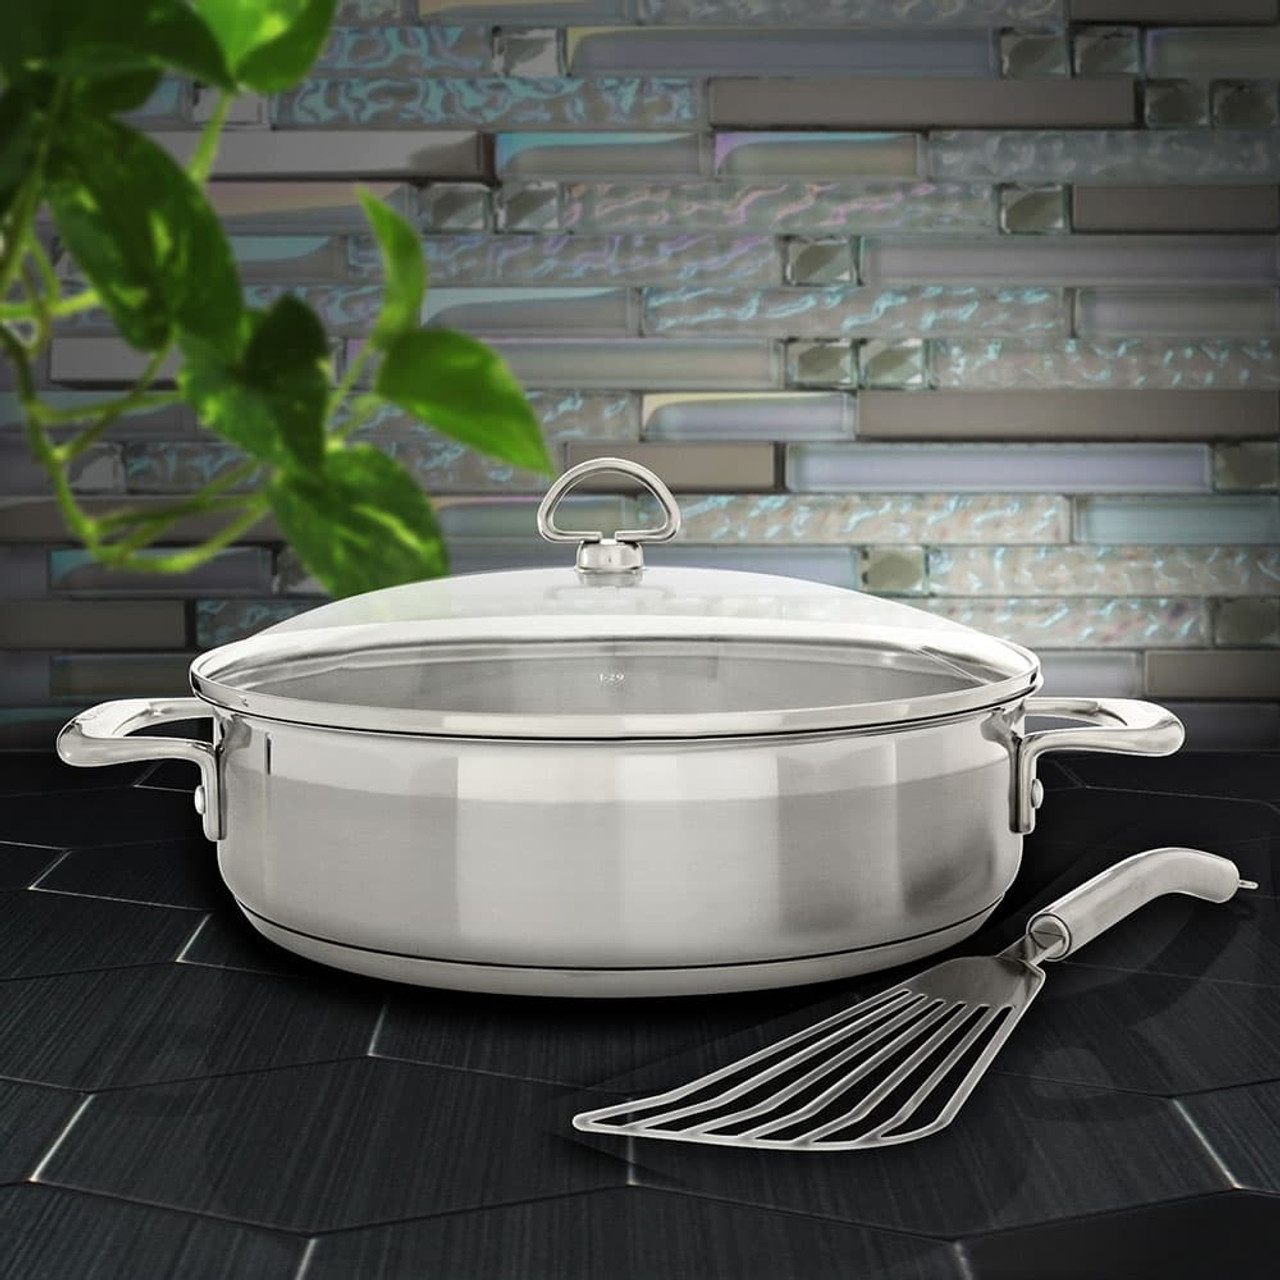 https://cdn11.bigcommerce.com/s-hccytny0od/images/stencil/1280x1280/products/2666/9425/chantal-induction-21-steel-sauteuse-2__40651.1564490647.jpg?c=2?imbypass=on